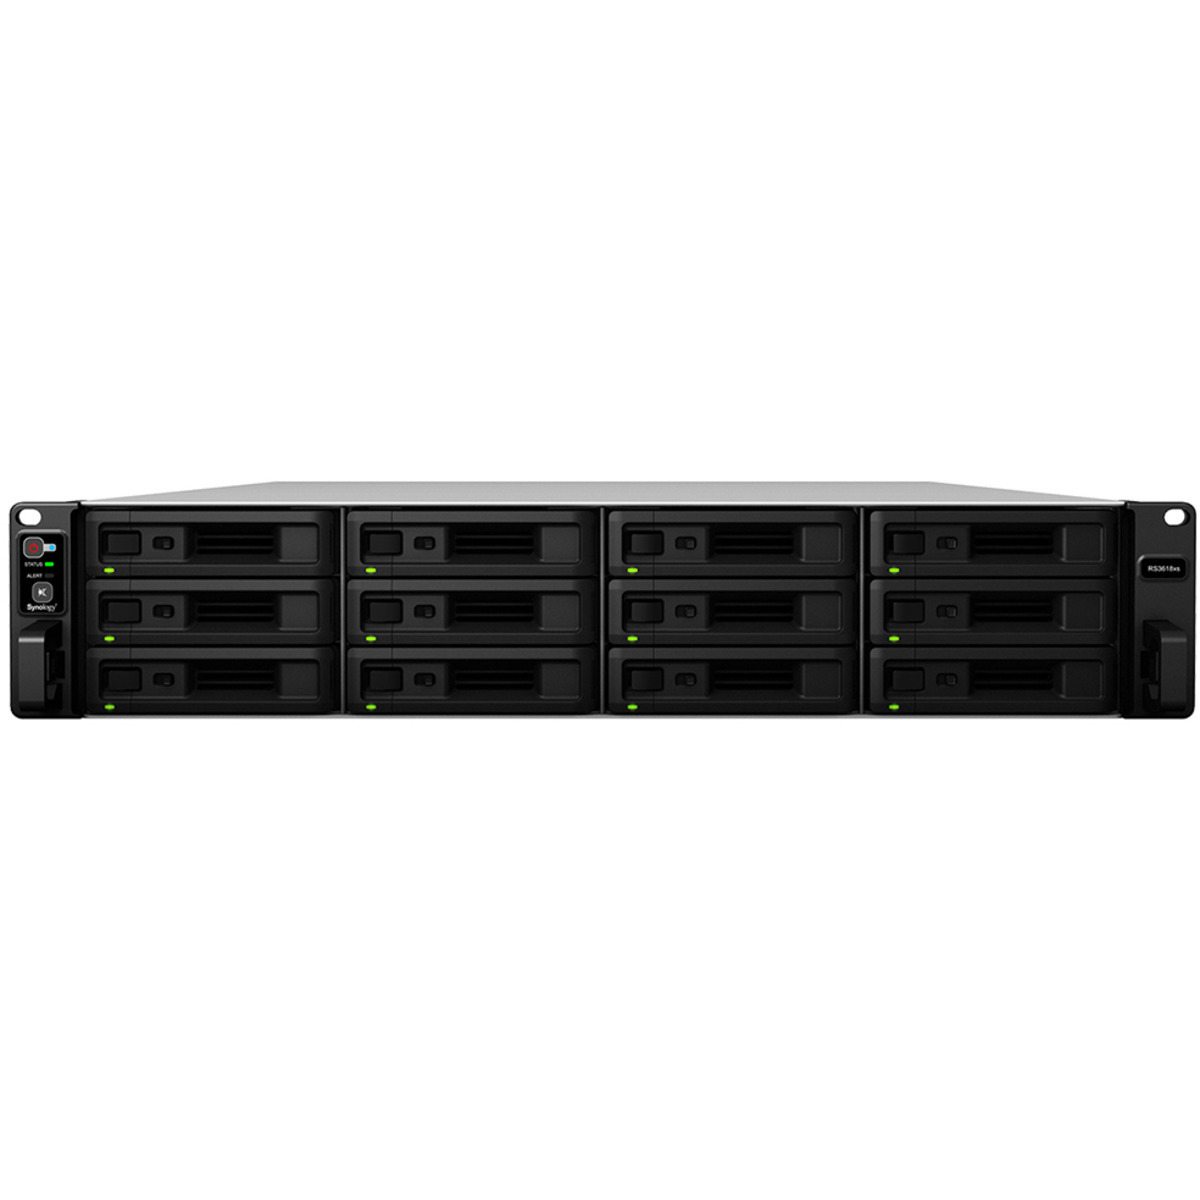 Synology RackStation RS3618xs 64tb 12-Bay RackMount Large Business / Enterprise NAS - Network Attached Storage Device 8x8tb Samsung 870 QVO MZ-77Q8T0 2.5 560/530MB/s SATA 6Gb/s SSD CONSUMER Class Drives Installed - Burn-In Tested RackStation RS3618xs